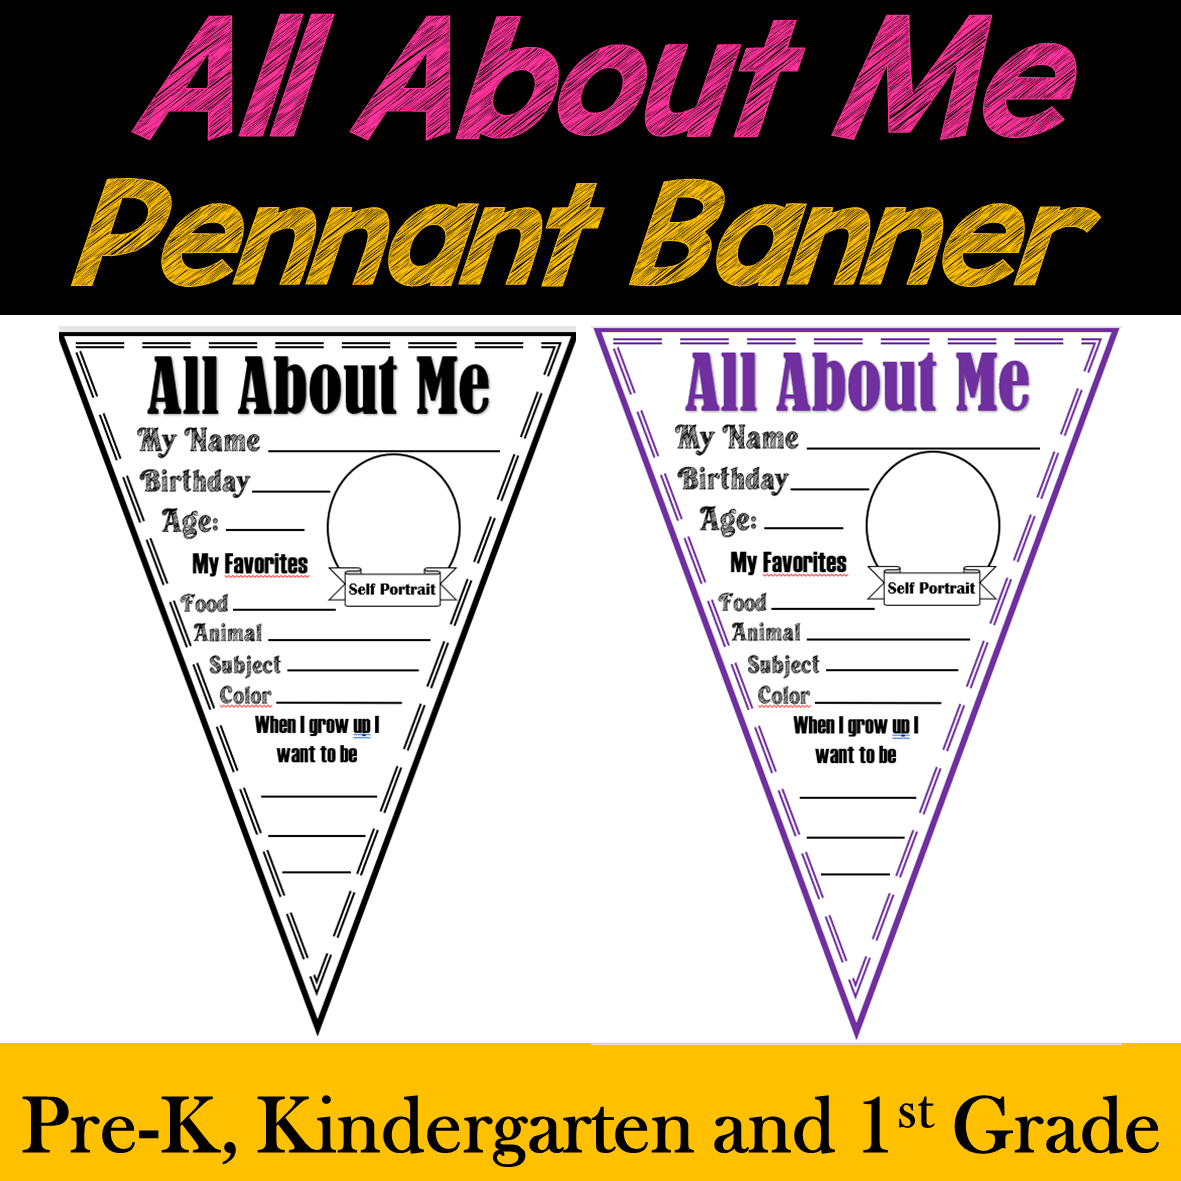 all-about-me-pennant-banner-back-to-school-classroom-display